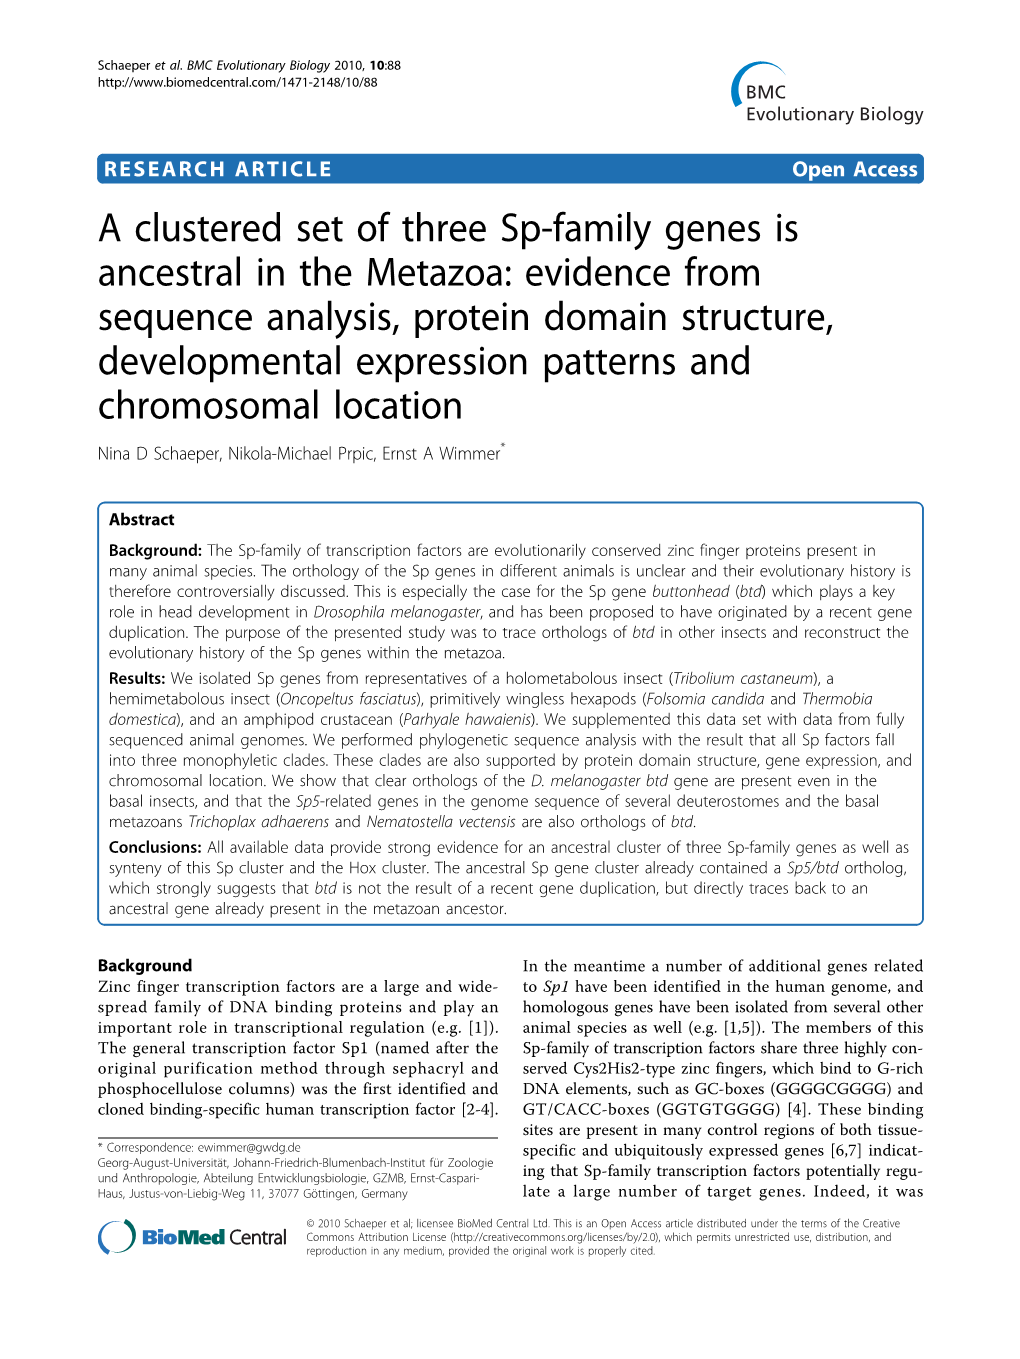 A Clustered Set of Three Sp-Family Genes Is Ancestral in the Metazoa